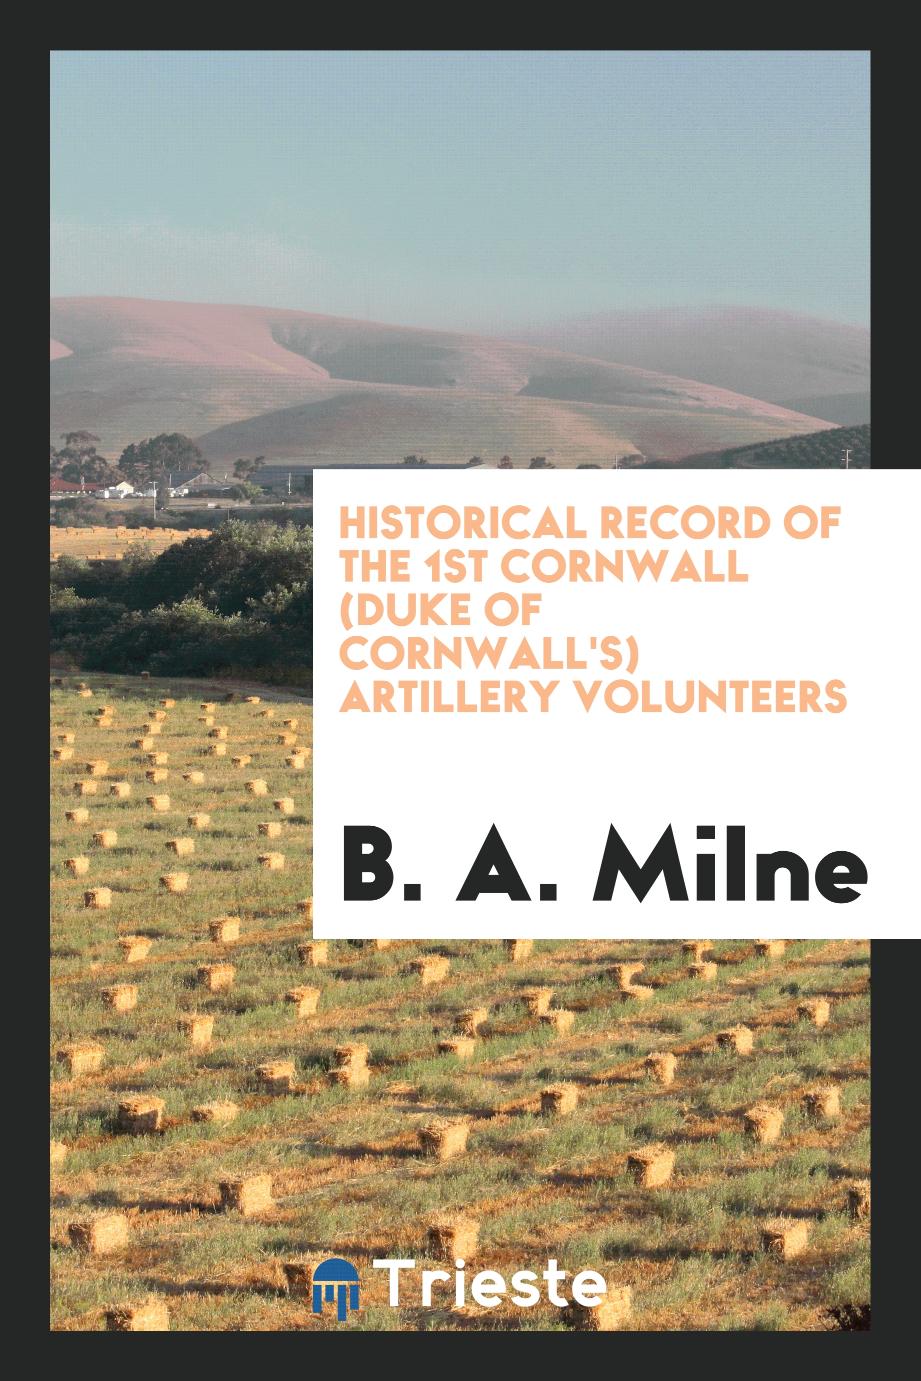 Historical Record of the 1st Cornwall (Duke of Cornwall's) Artillery Volunteers